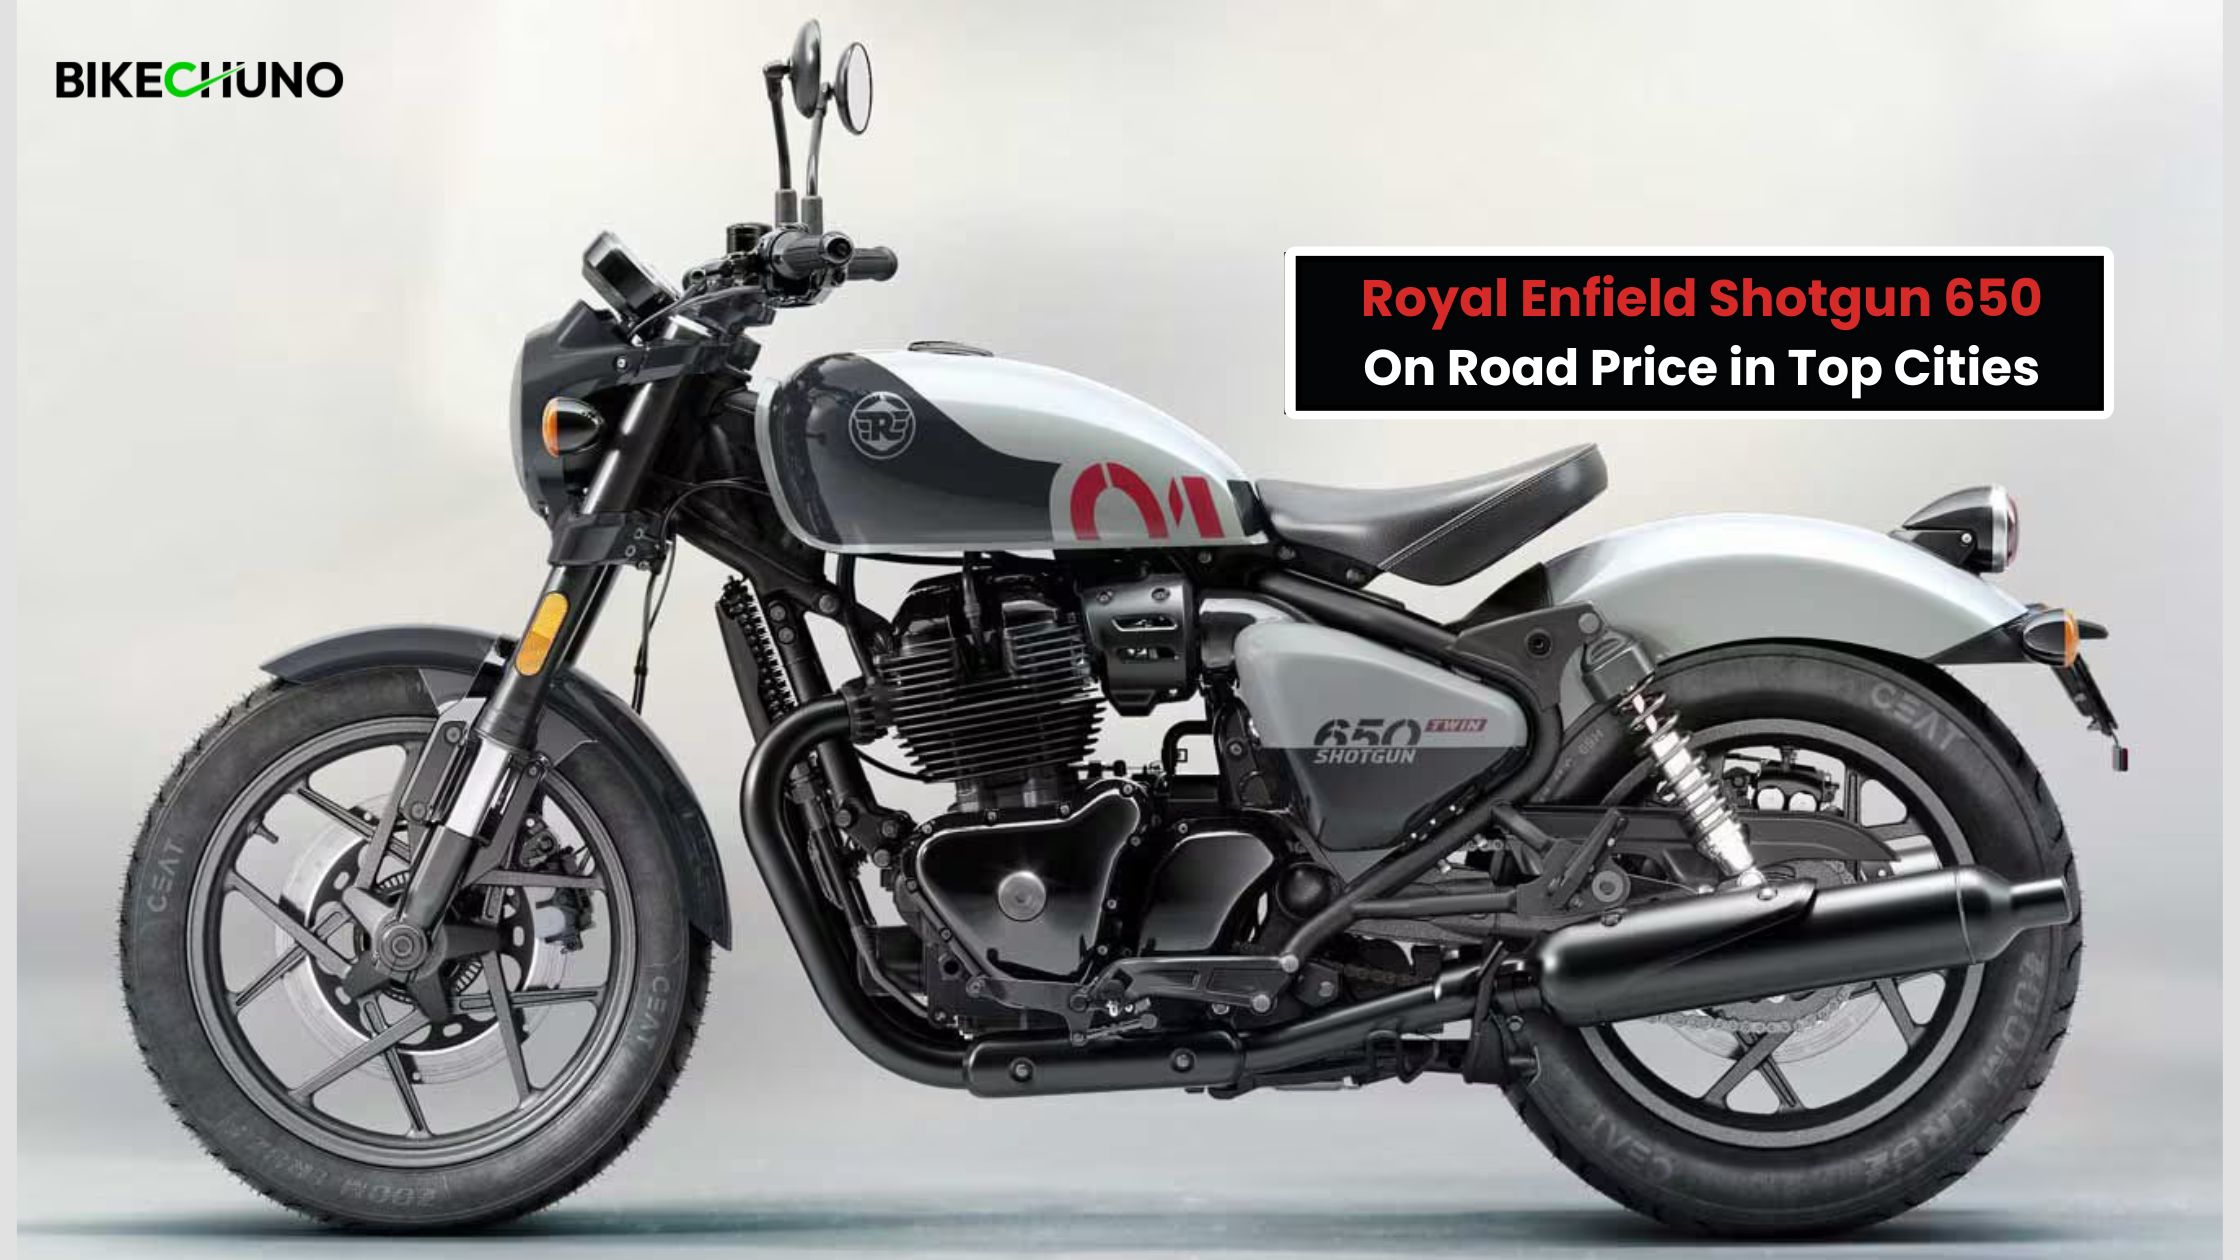 Royal Enfield Shotgun 650 on-road prices in top cities of India